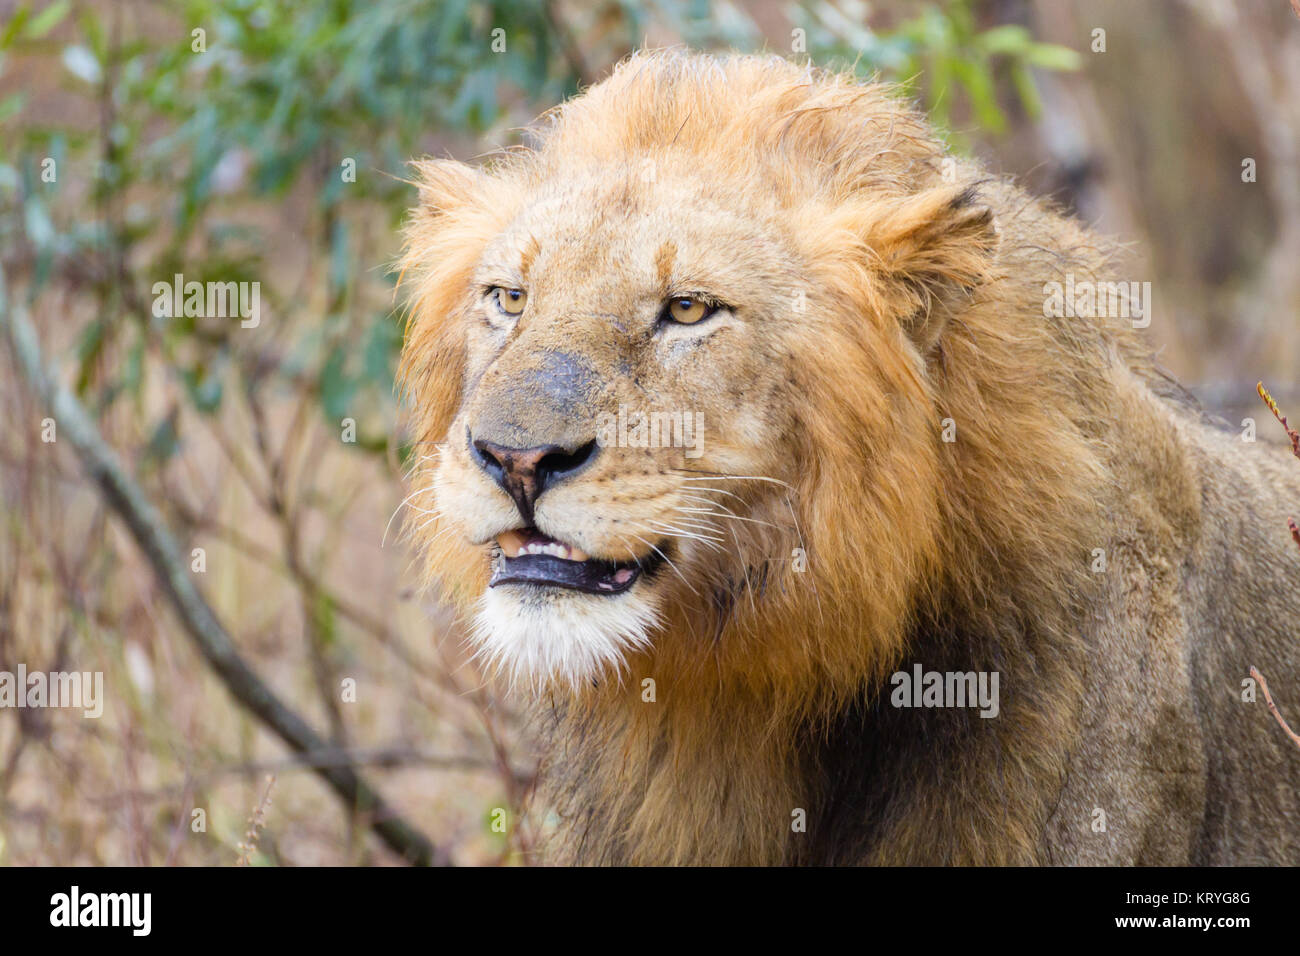 Lion from Kruger National Park, South Africa Stock Photo